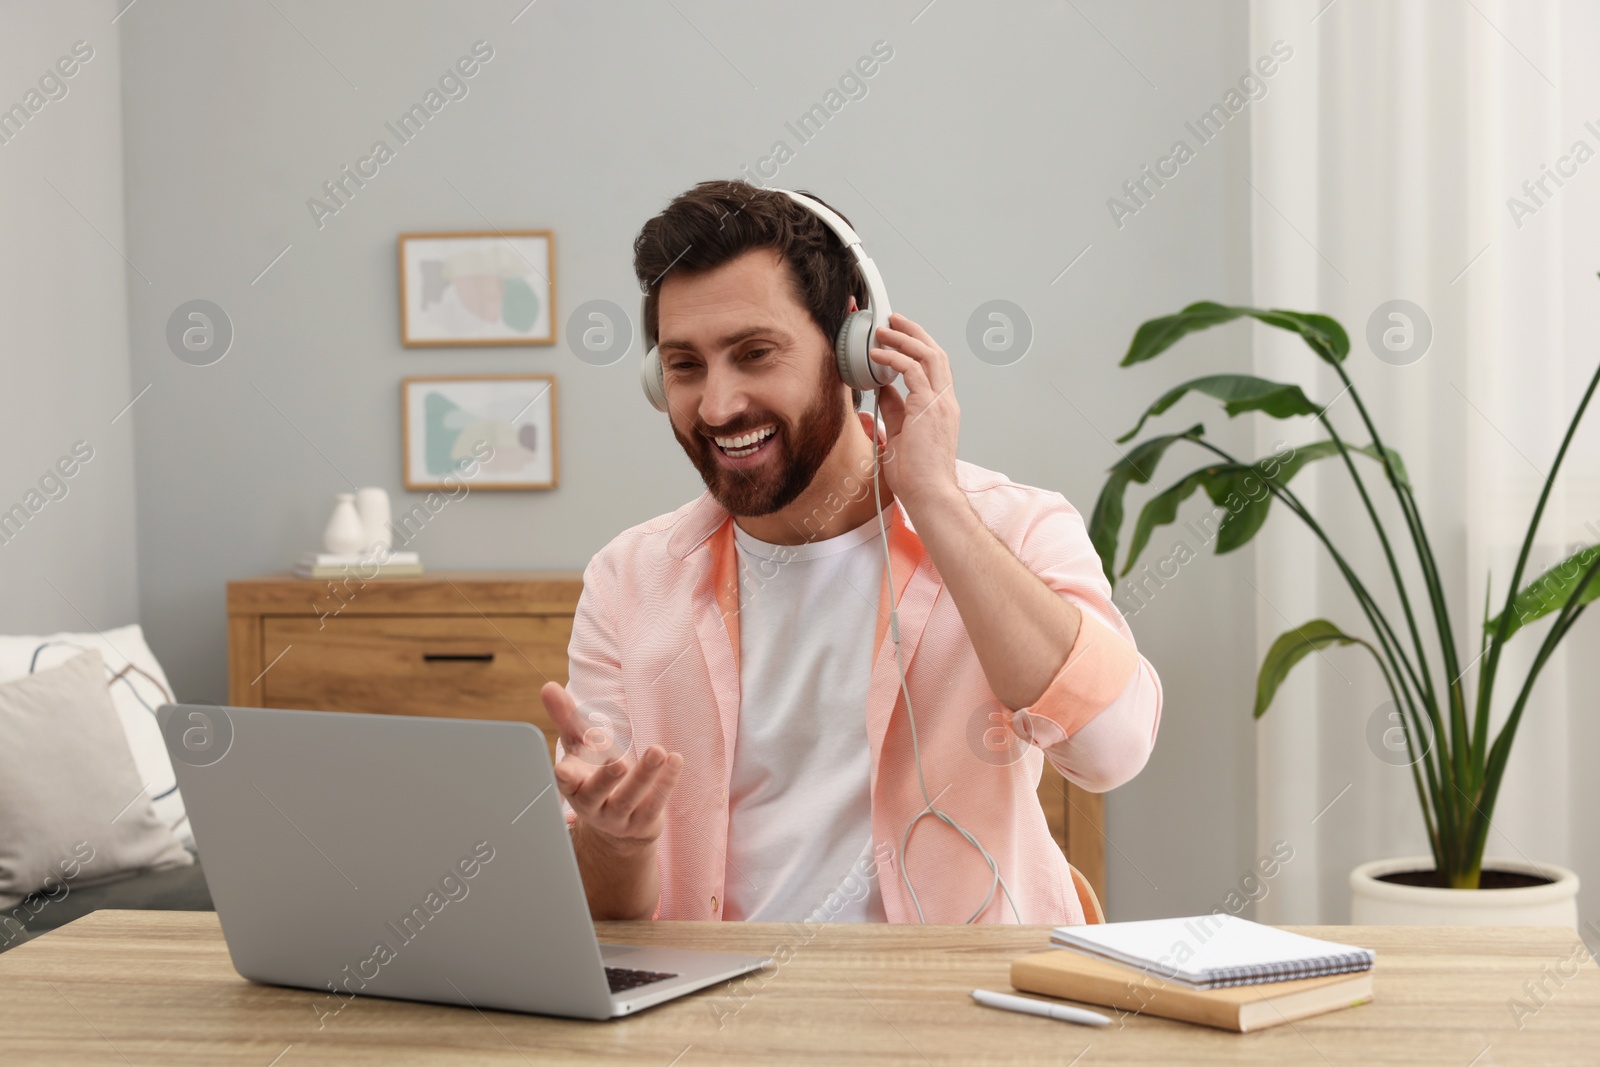 Photo of Man in headphones having video chat via laptop at home